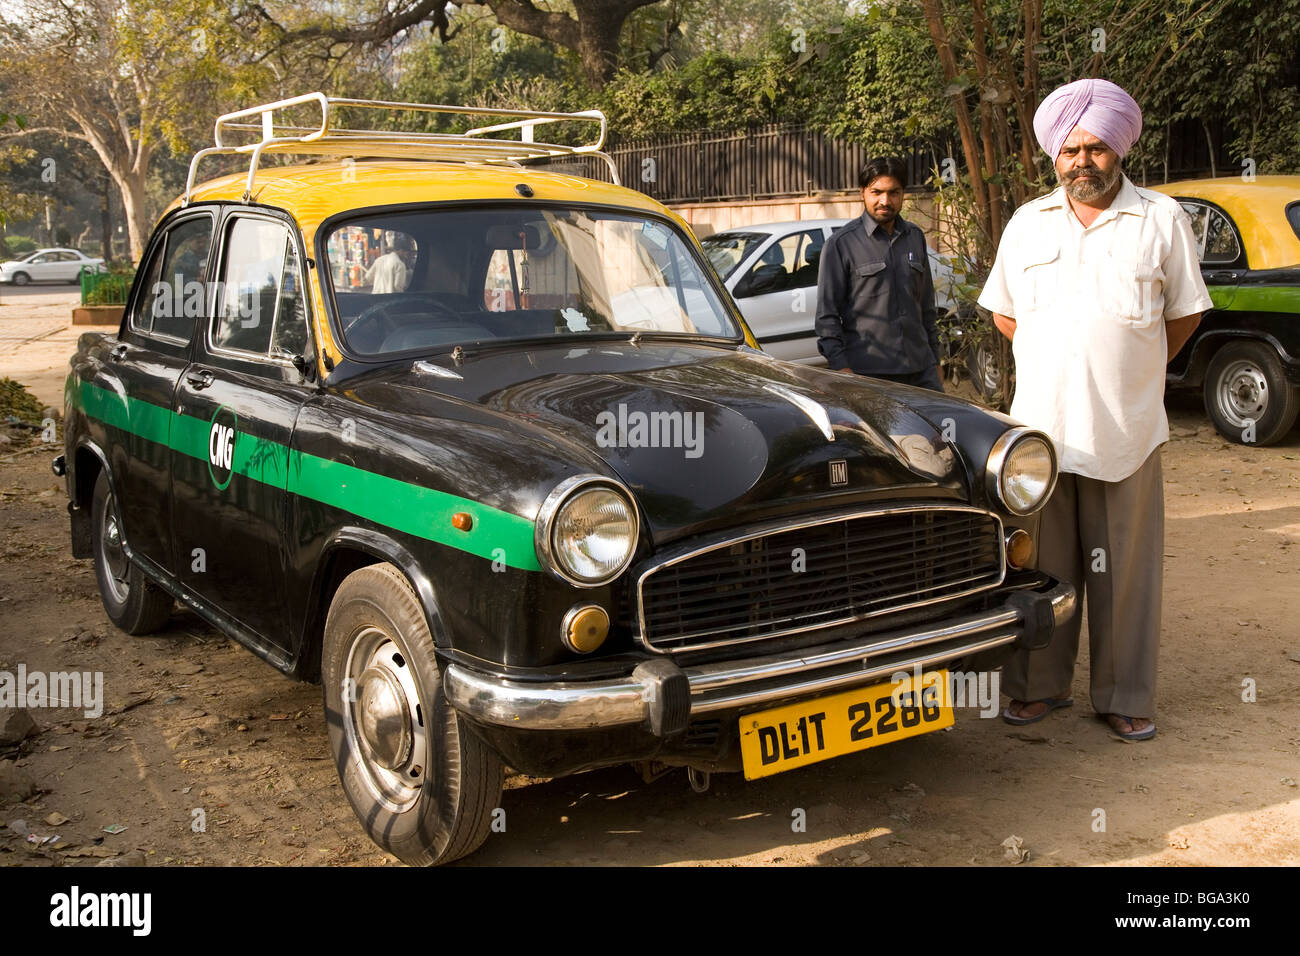 A Sikh taxi driver stands by his black taxi in New Delhi, India. Stock Photo